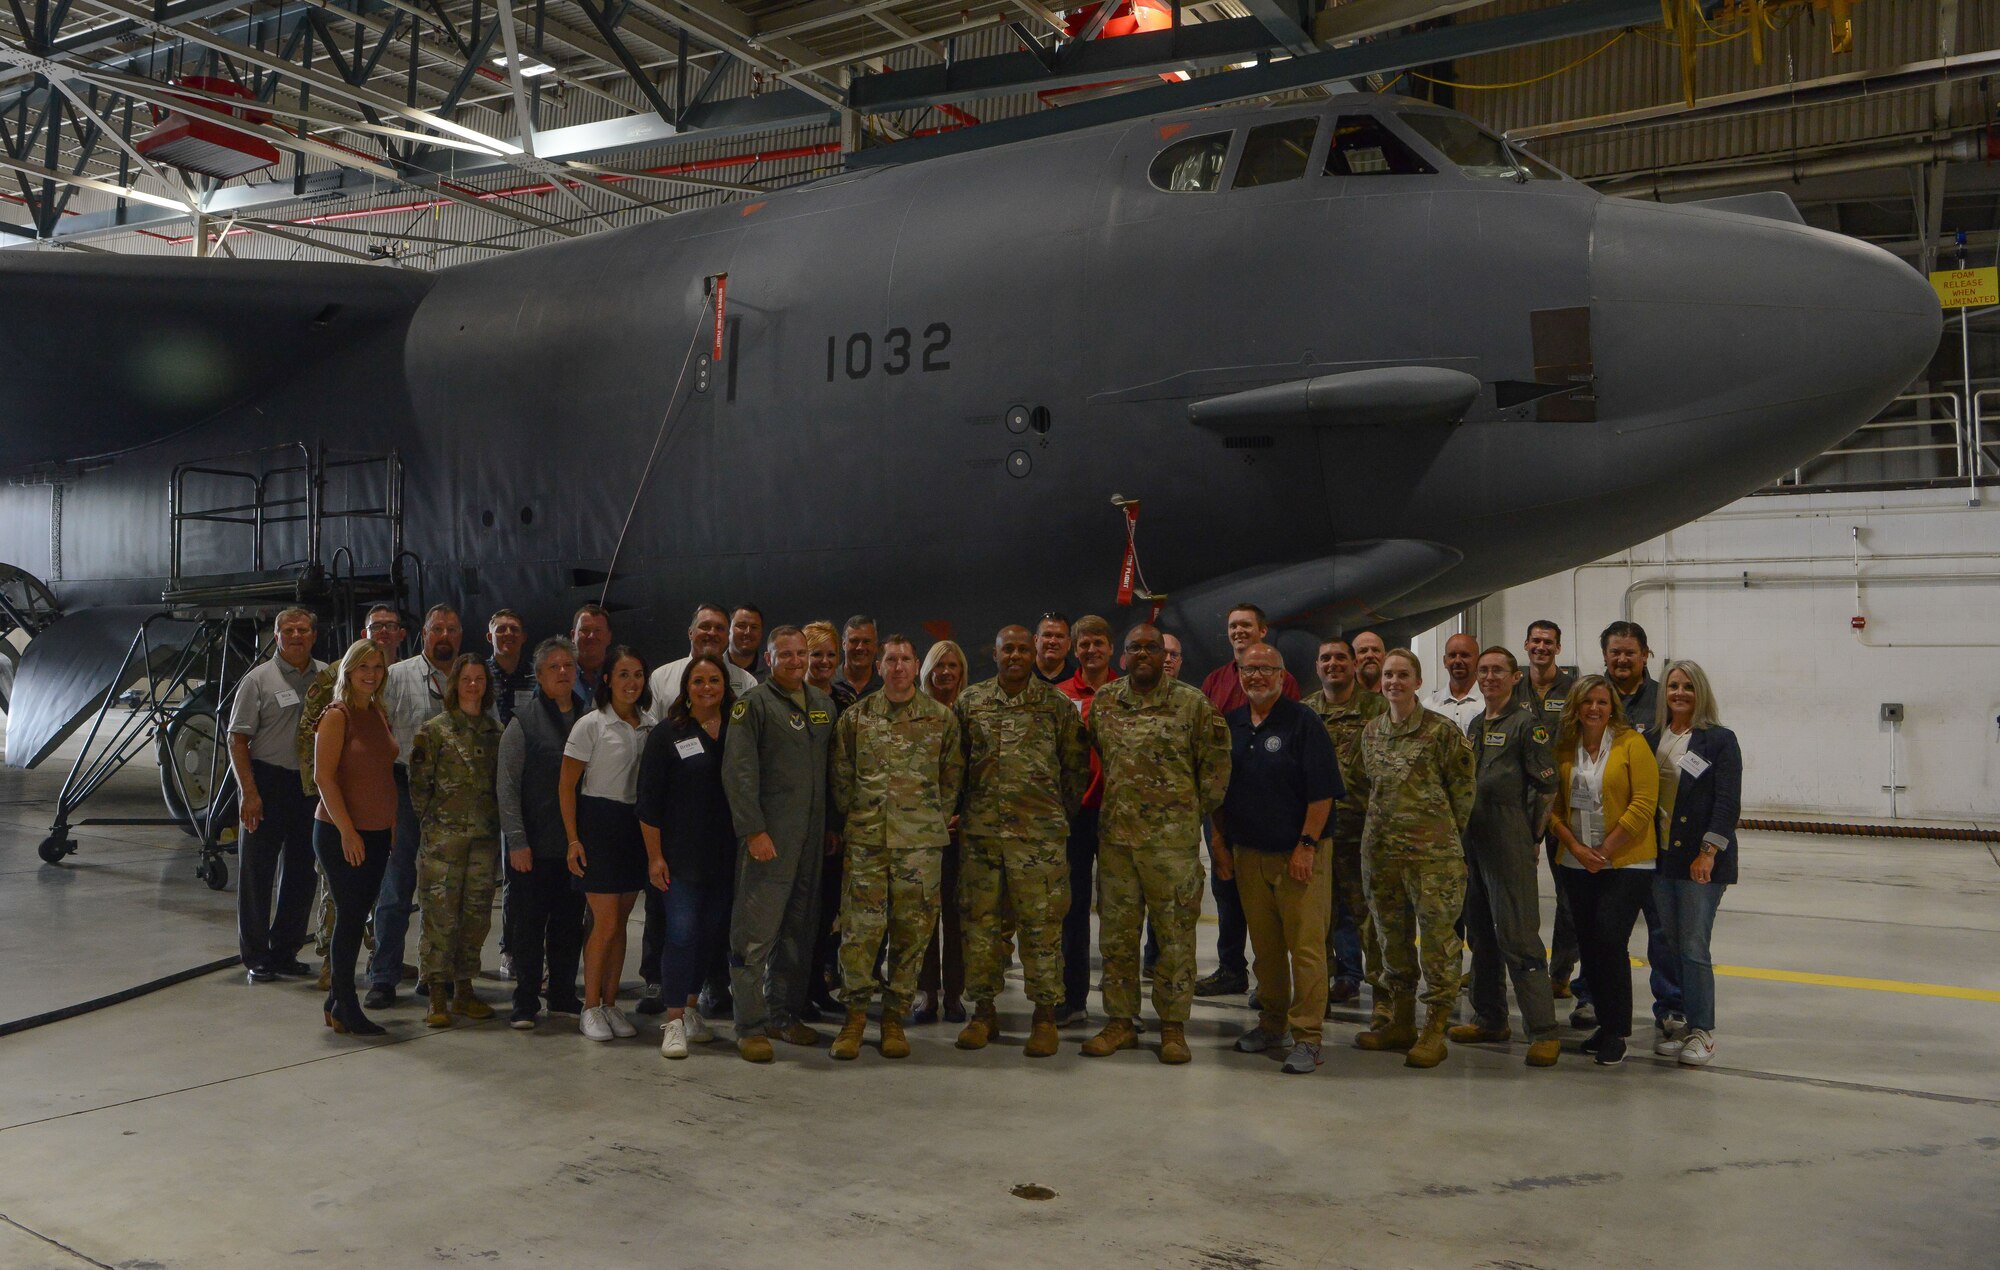 Minot city leaders pose for a photo in front of B-52H Stratofortress at Minot Air Force Base, North Dakota, July 13, 2023. The B-52H has been assigned to Minot Air Force Base since 1968 and plays a critical role in the 5th Bomb Wing mission with its ability to perform strategic attack, air, interdiction, offensive counter-air and maritime operations. (U.S. Air Force photo by Airman 1st Class Trust Tate)